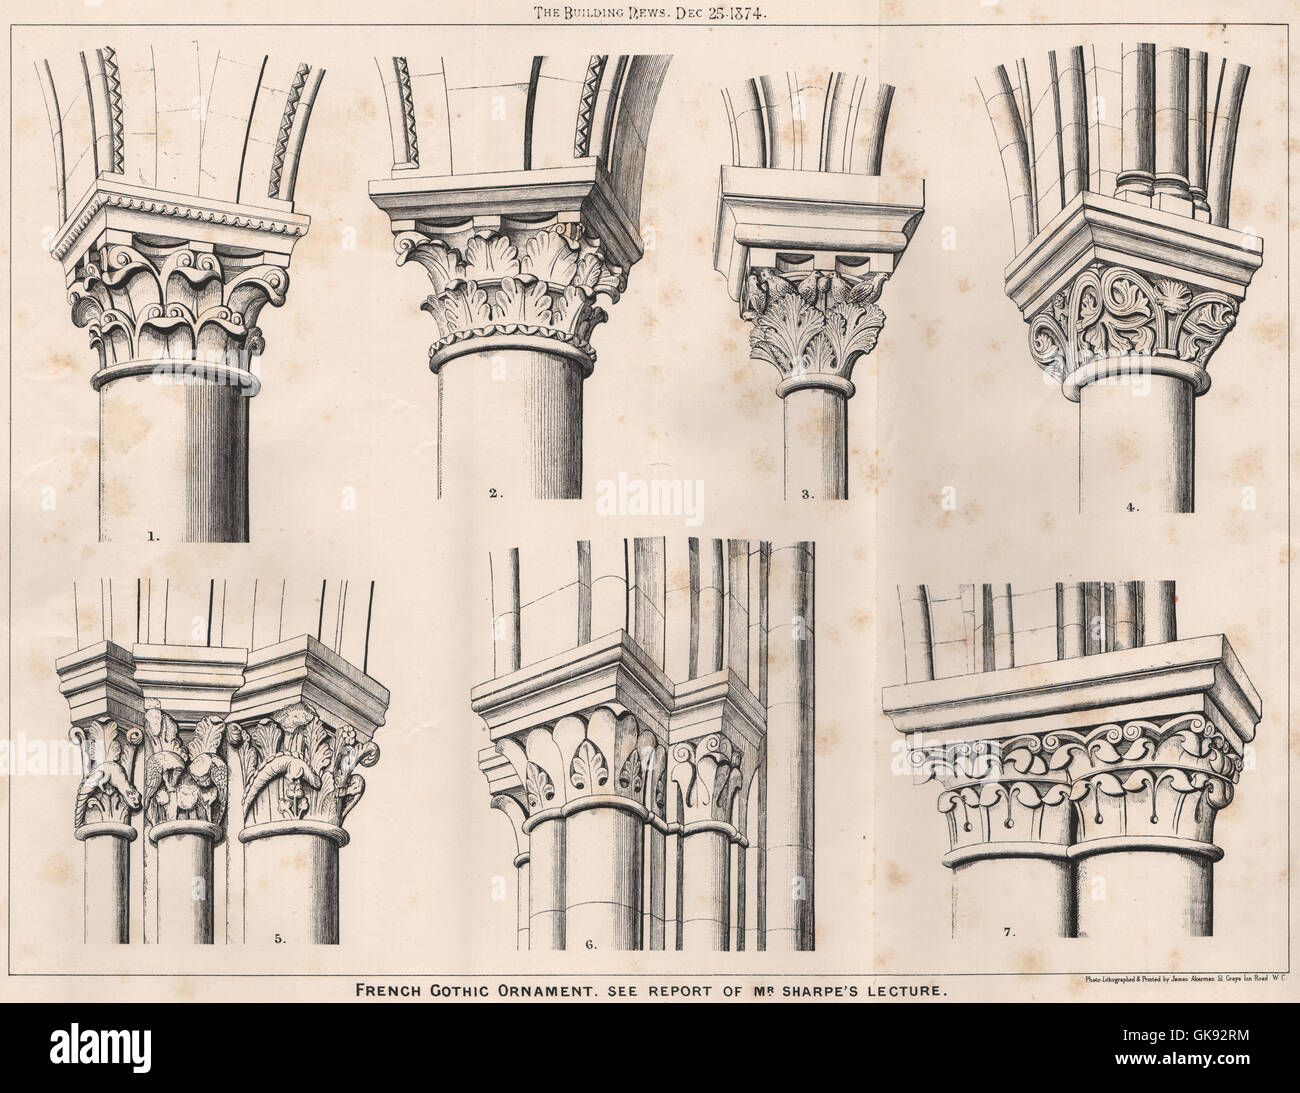 French Gothic Ornament. See Report of Mr. Sharpe's Lecture. France, print 1874 Stock Photo